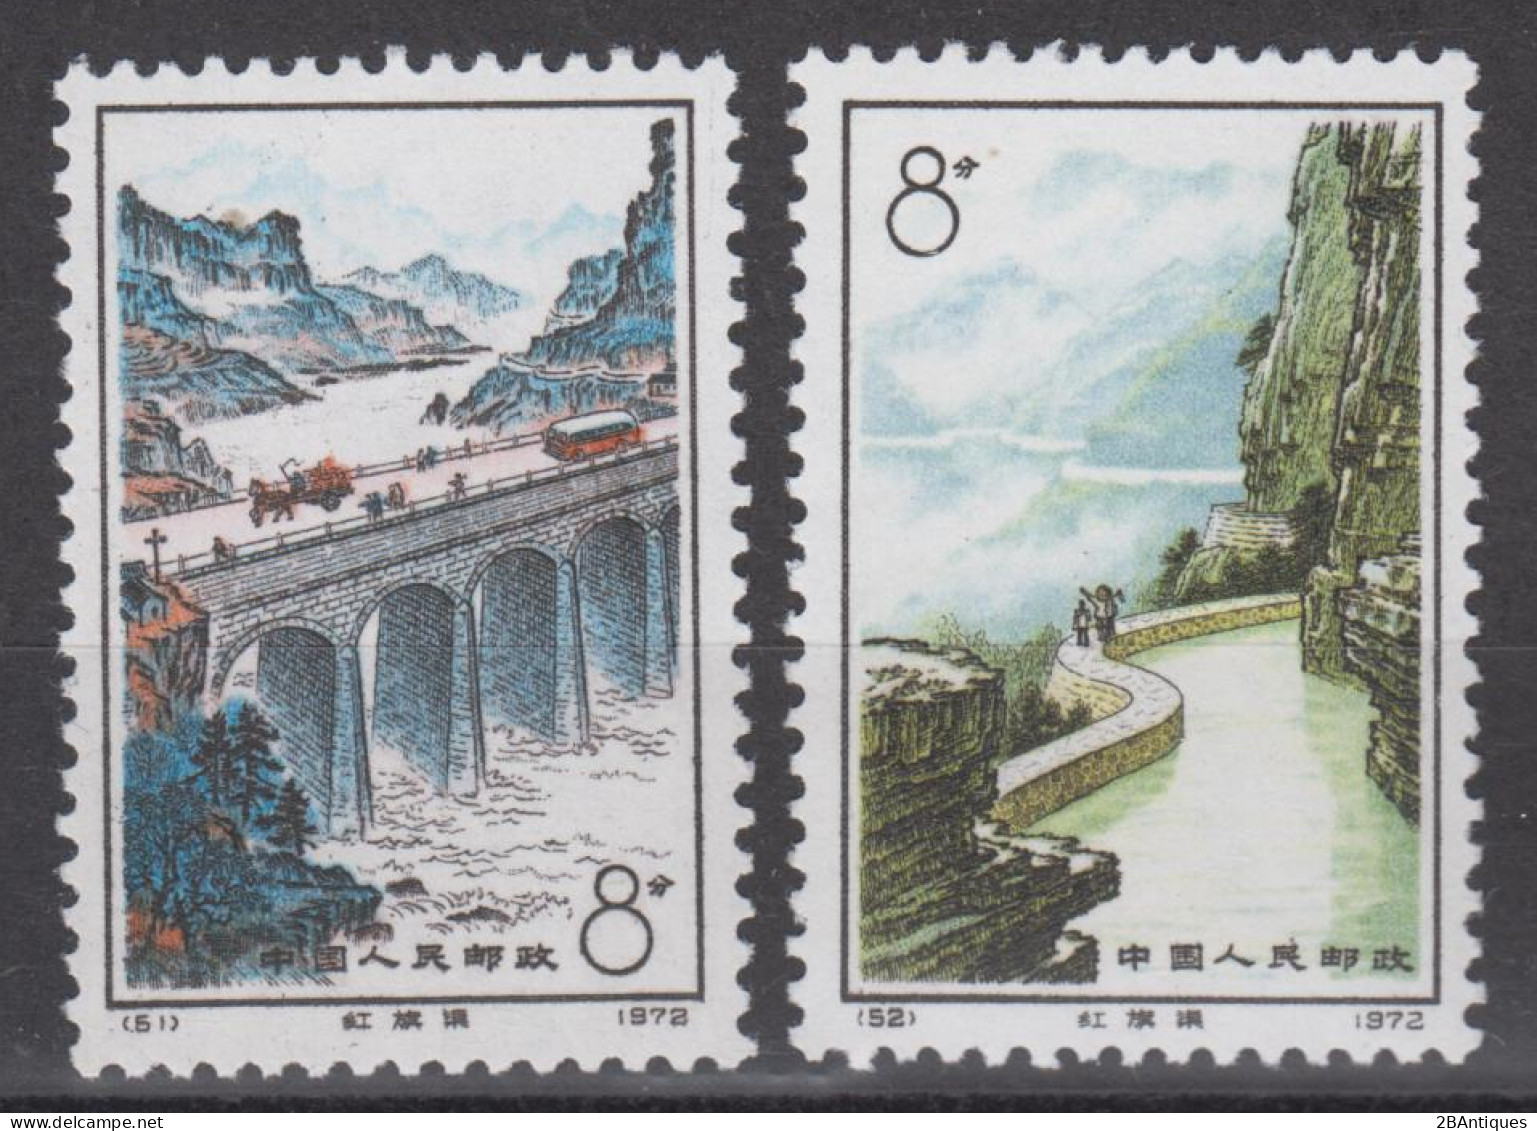 PR CHINA 1972 - Construction Of Red Flag Canal MNH** - Neufs